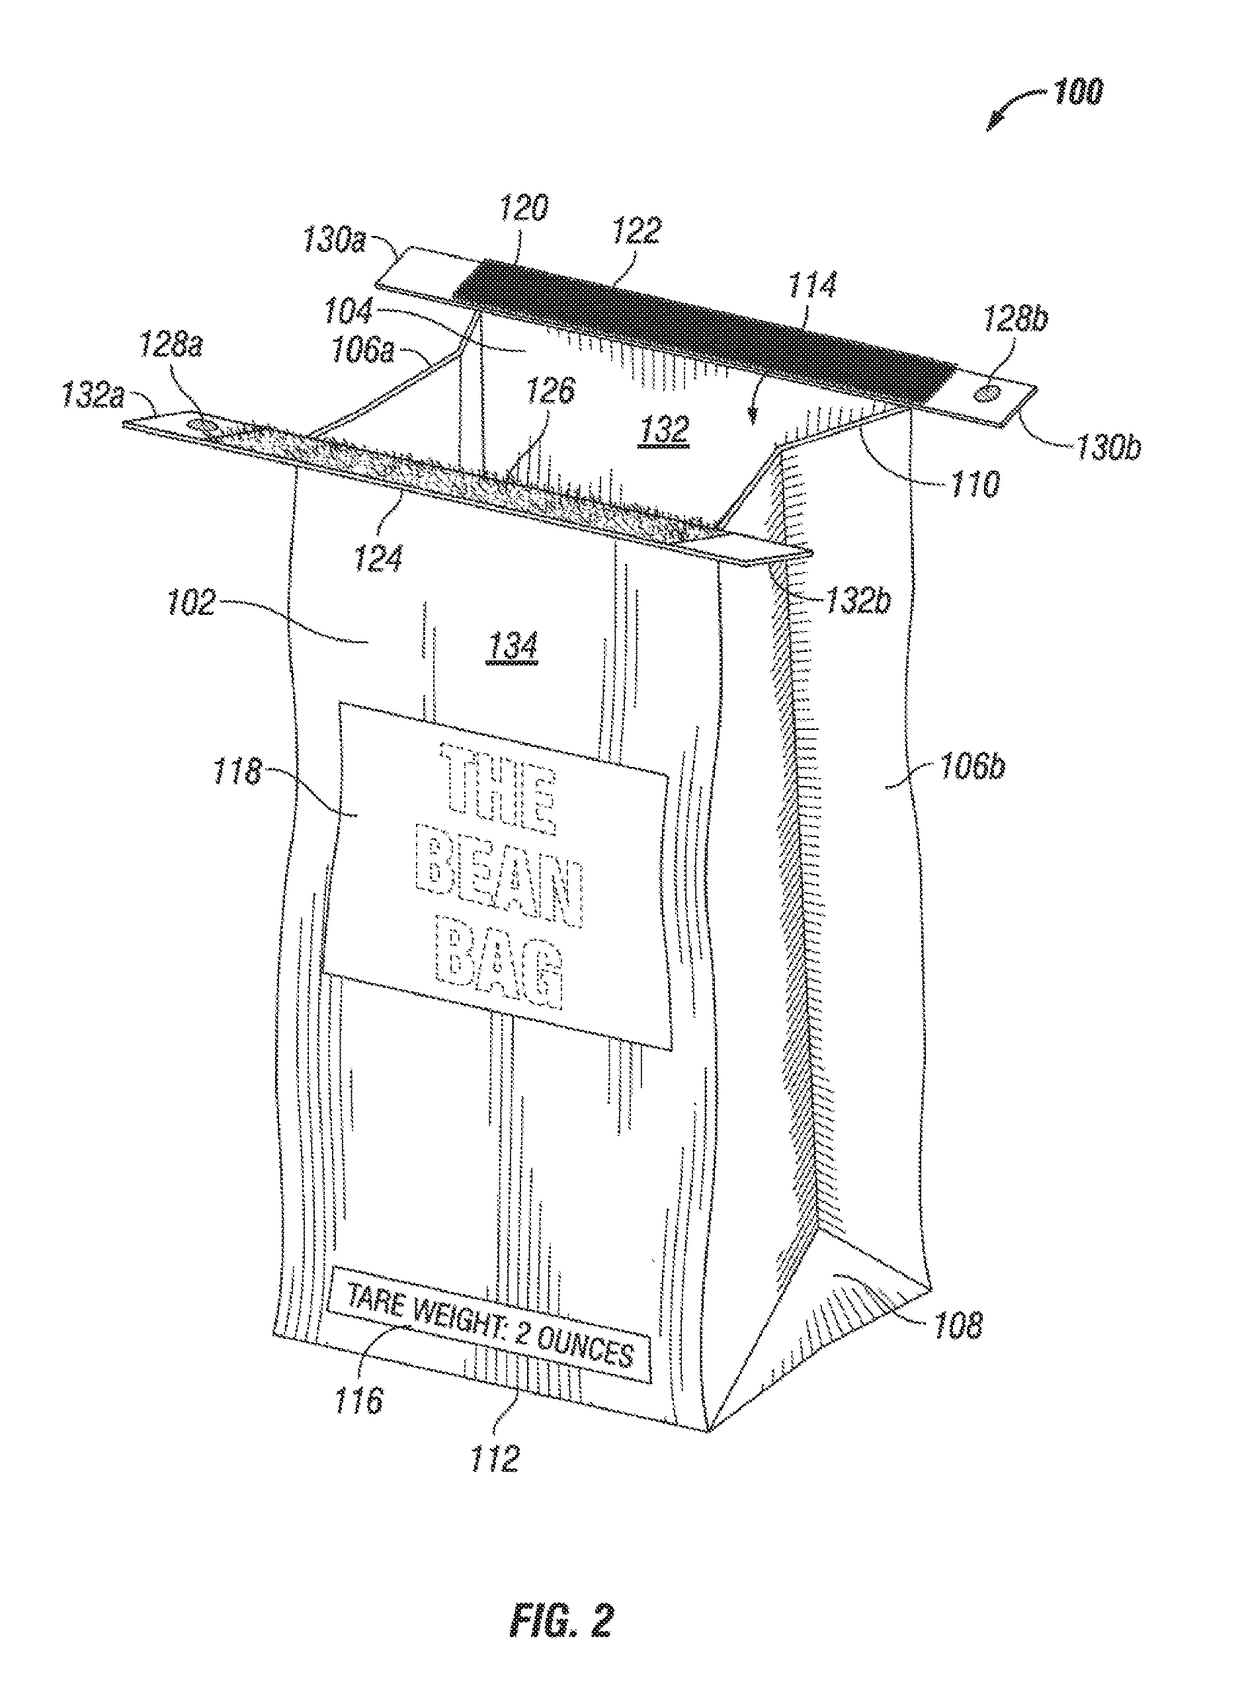 Reusable labeled coffee bean bag and method of operation